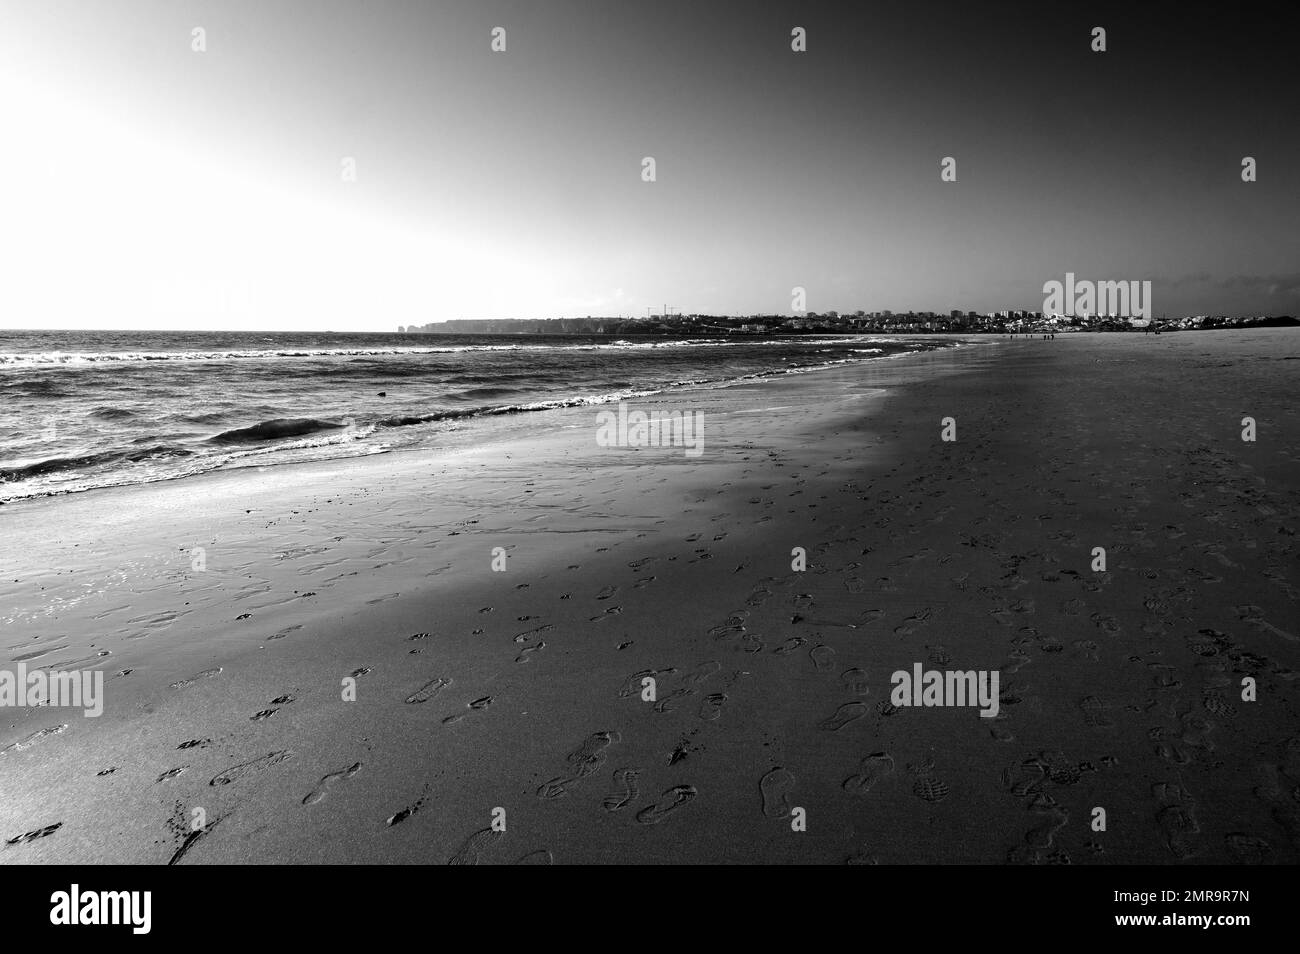 A deserted sandy beach and a city skyline in the distance Stock Photo